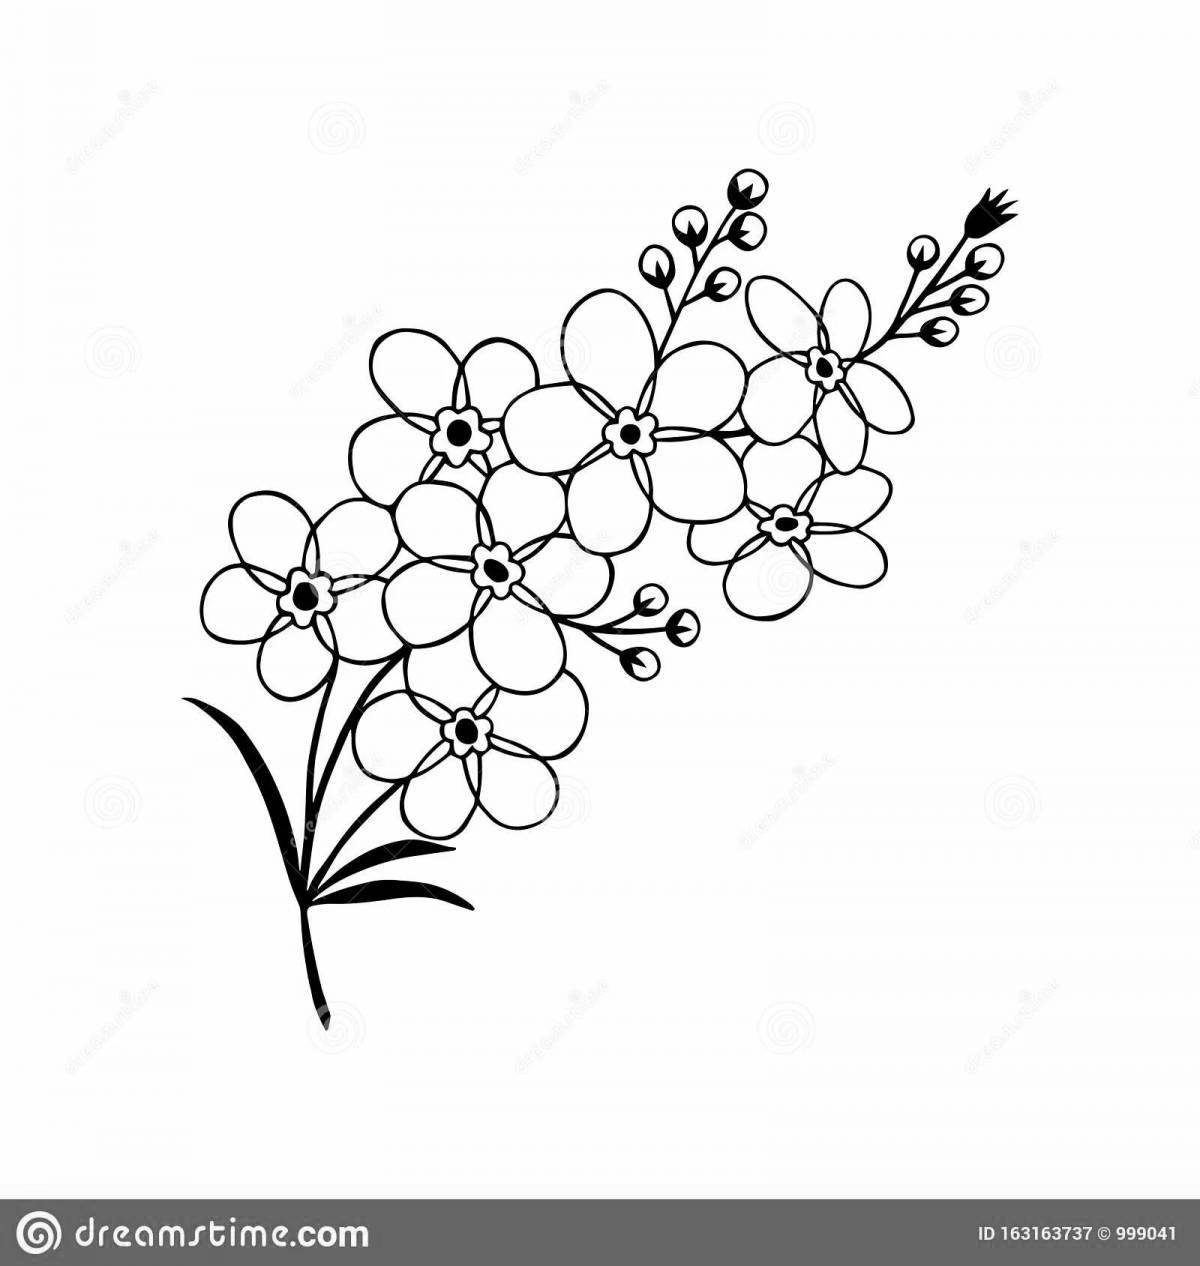 Coloring page gorgeous forget-me-not flower